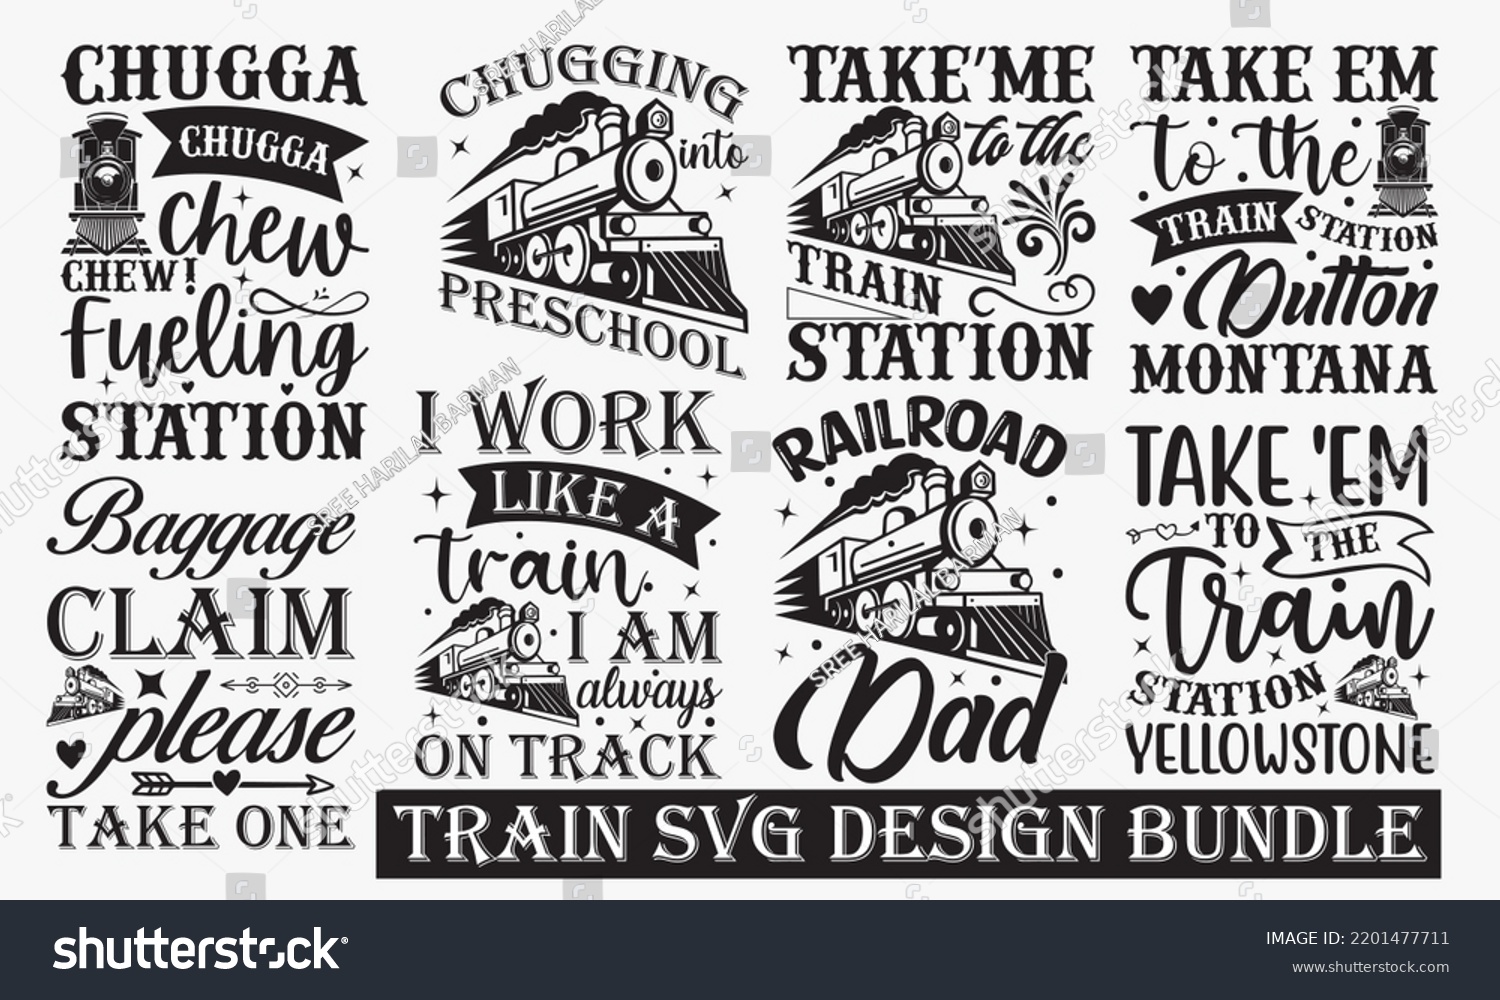 SVG of TRAIN SVG DESIGN BUNDLE - Train t-shirt design, Hand drew lettering phrases, and Calligraphy graphic design,  For stickers, t-shirts, templet, mugs, etc. SVG Files for Cutting Circuit and Silhouette.  svg